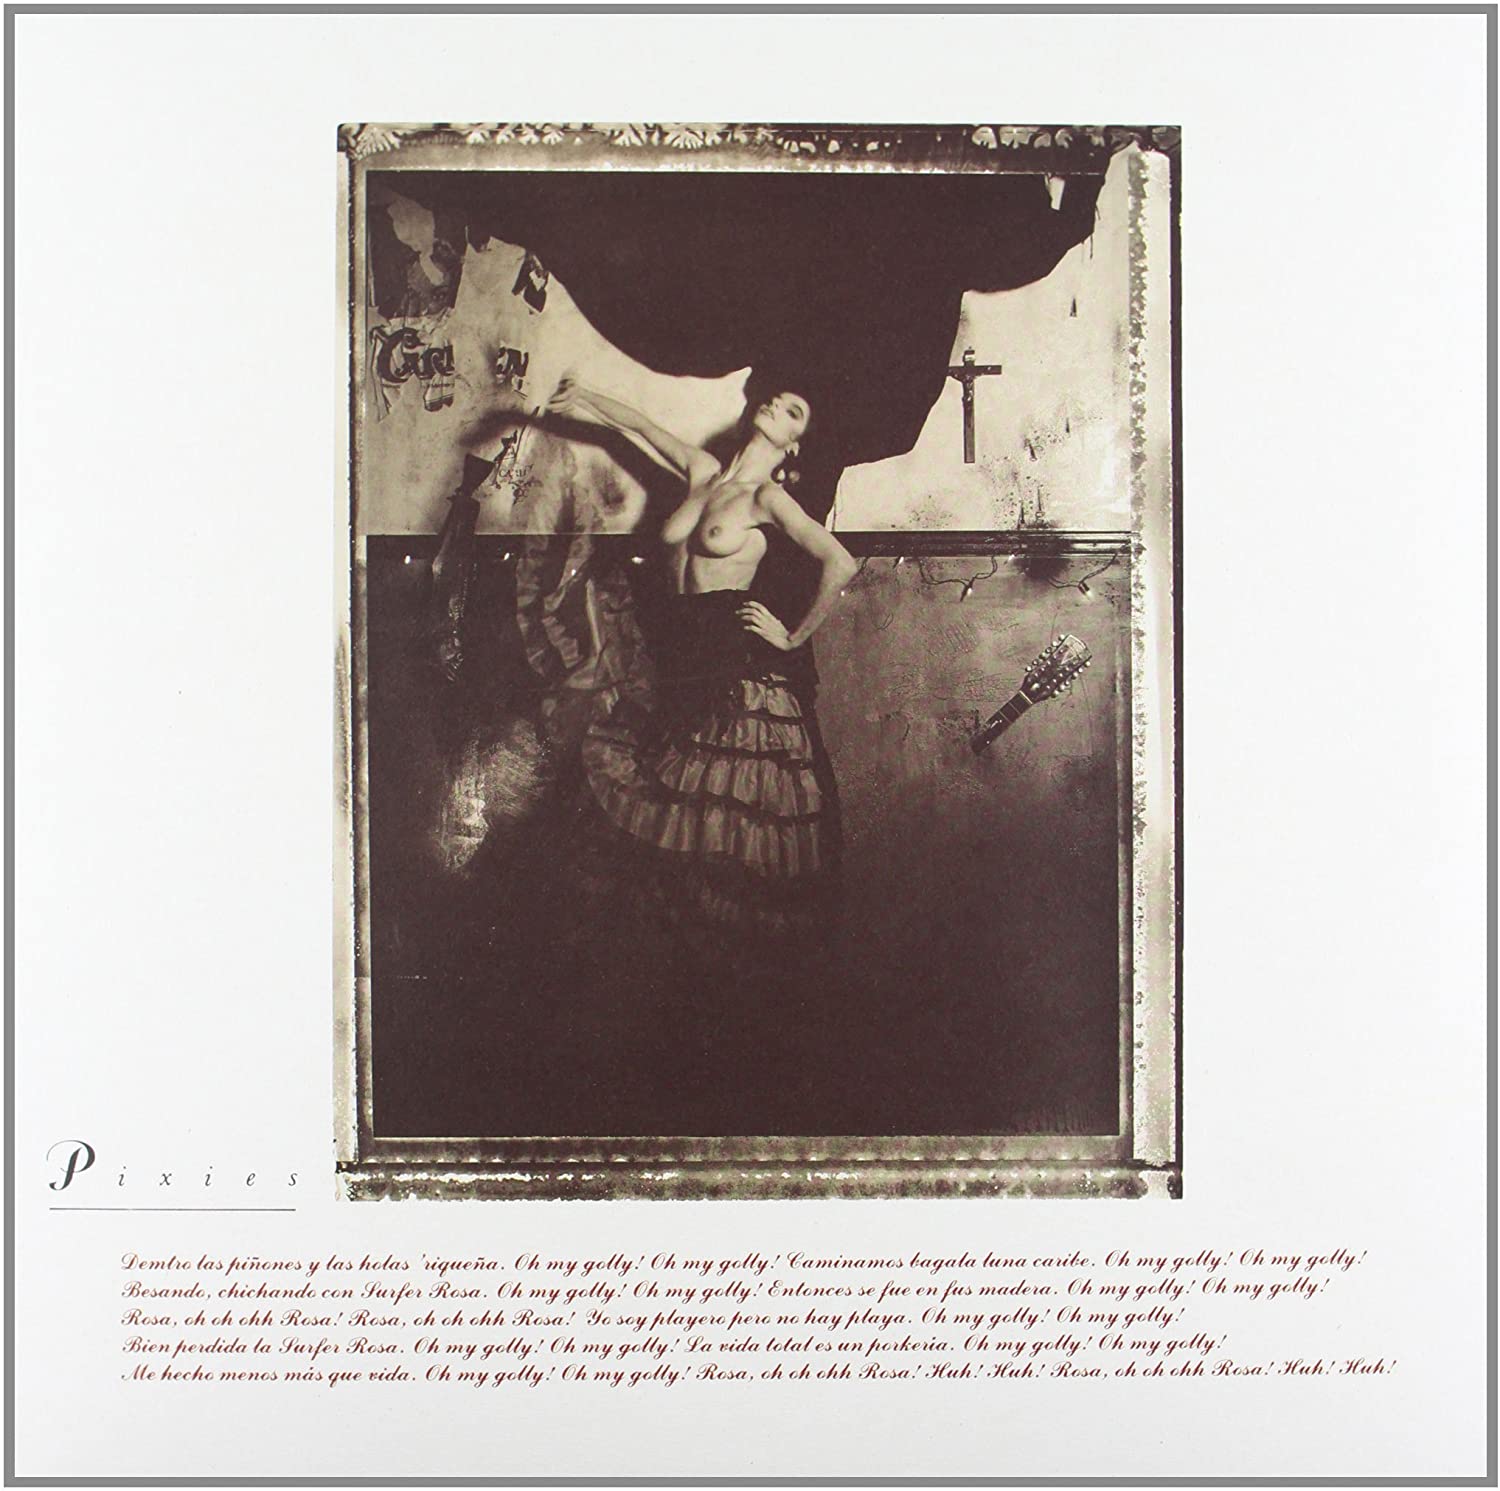 Debut studio album on Vinyl from Pixies featuring Gigantic, Bone Machine and Where Is My Mind?